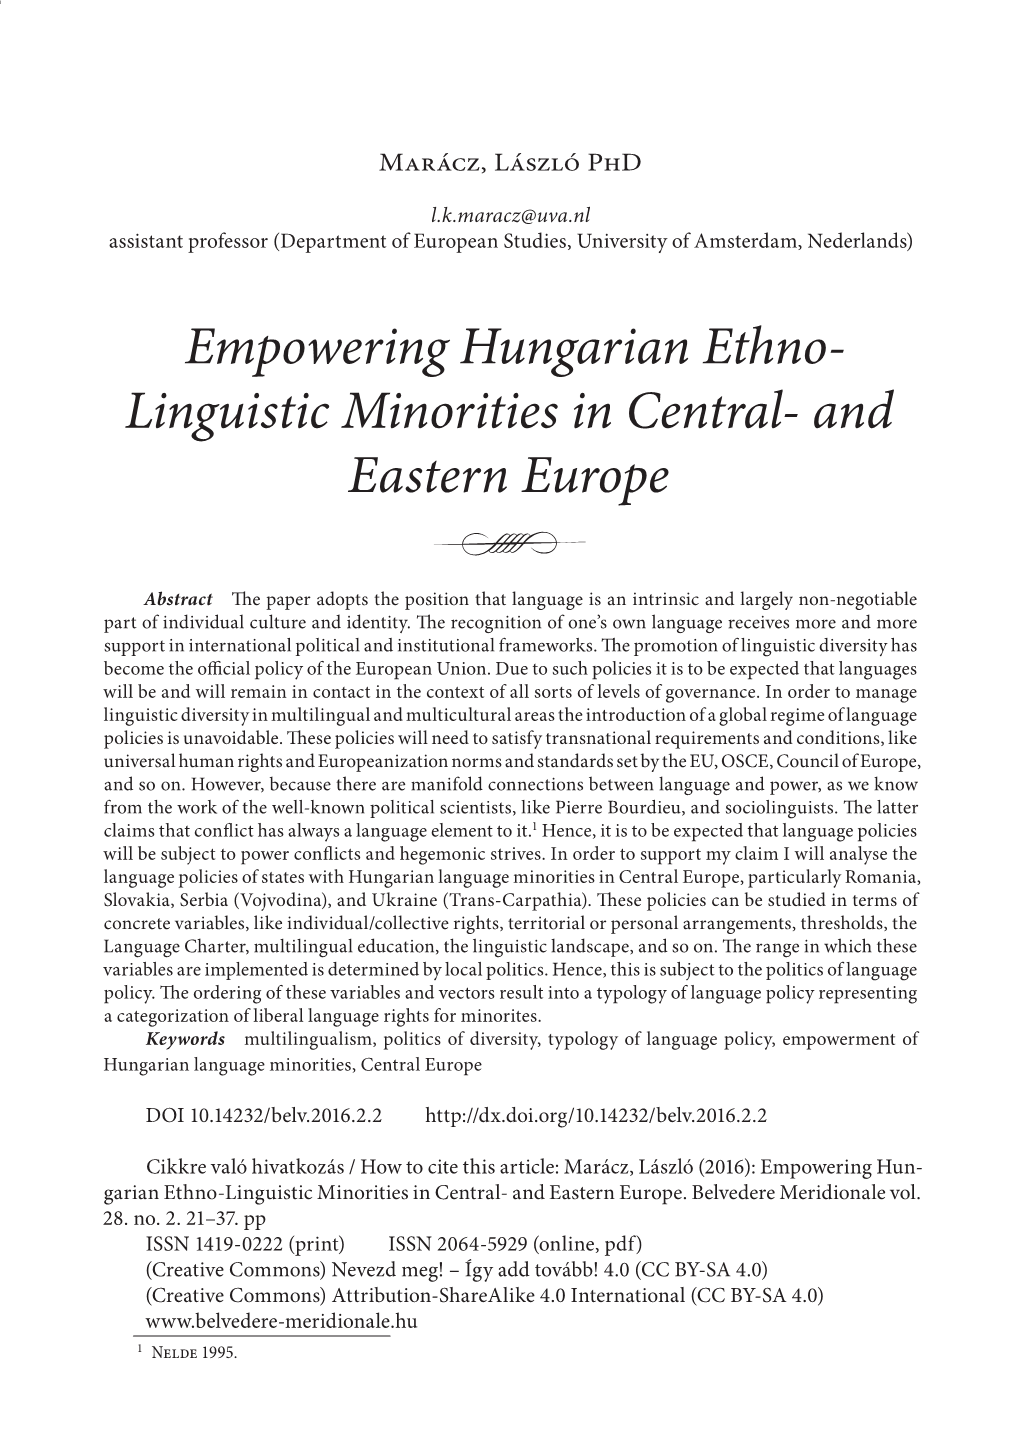 Empowering Hungarian Ethno- Linguistic Minorities in Central- and Eastern Europe